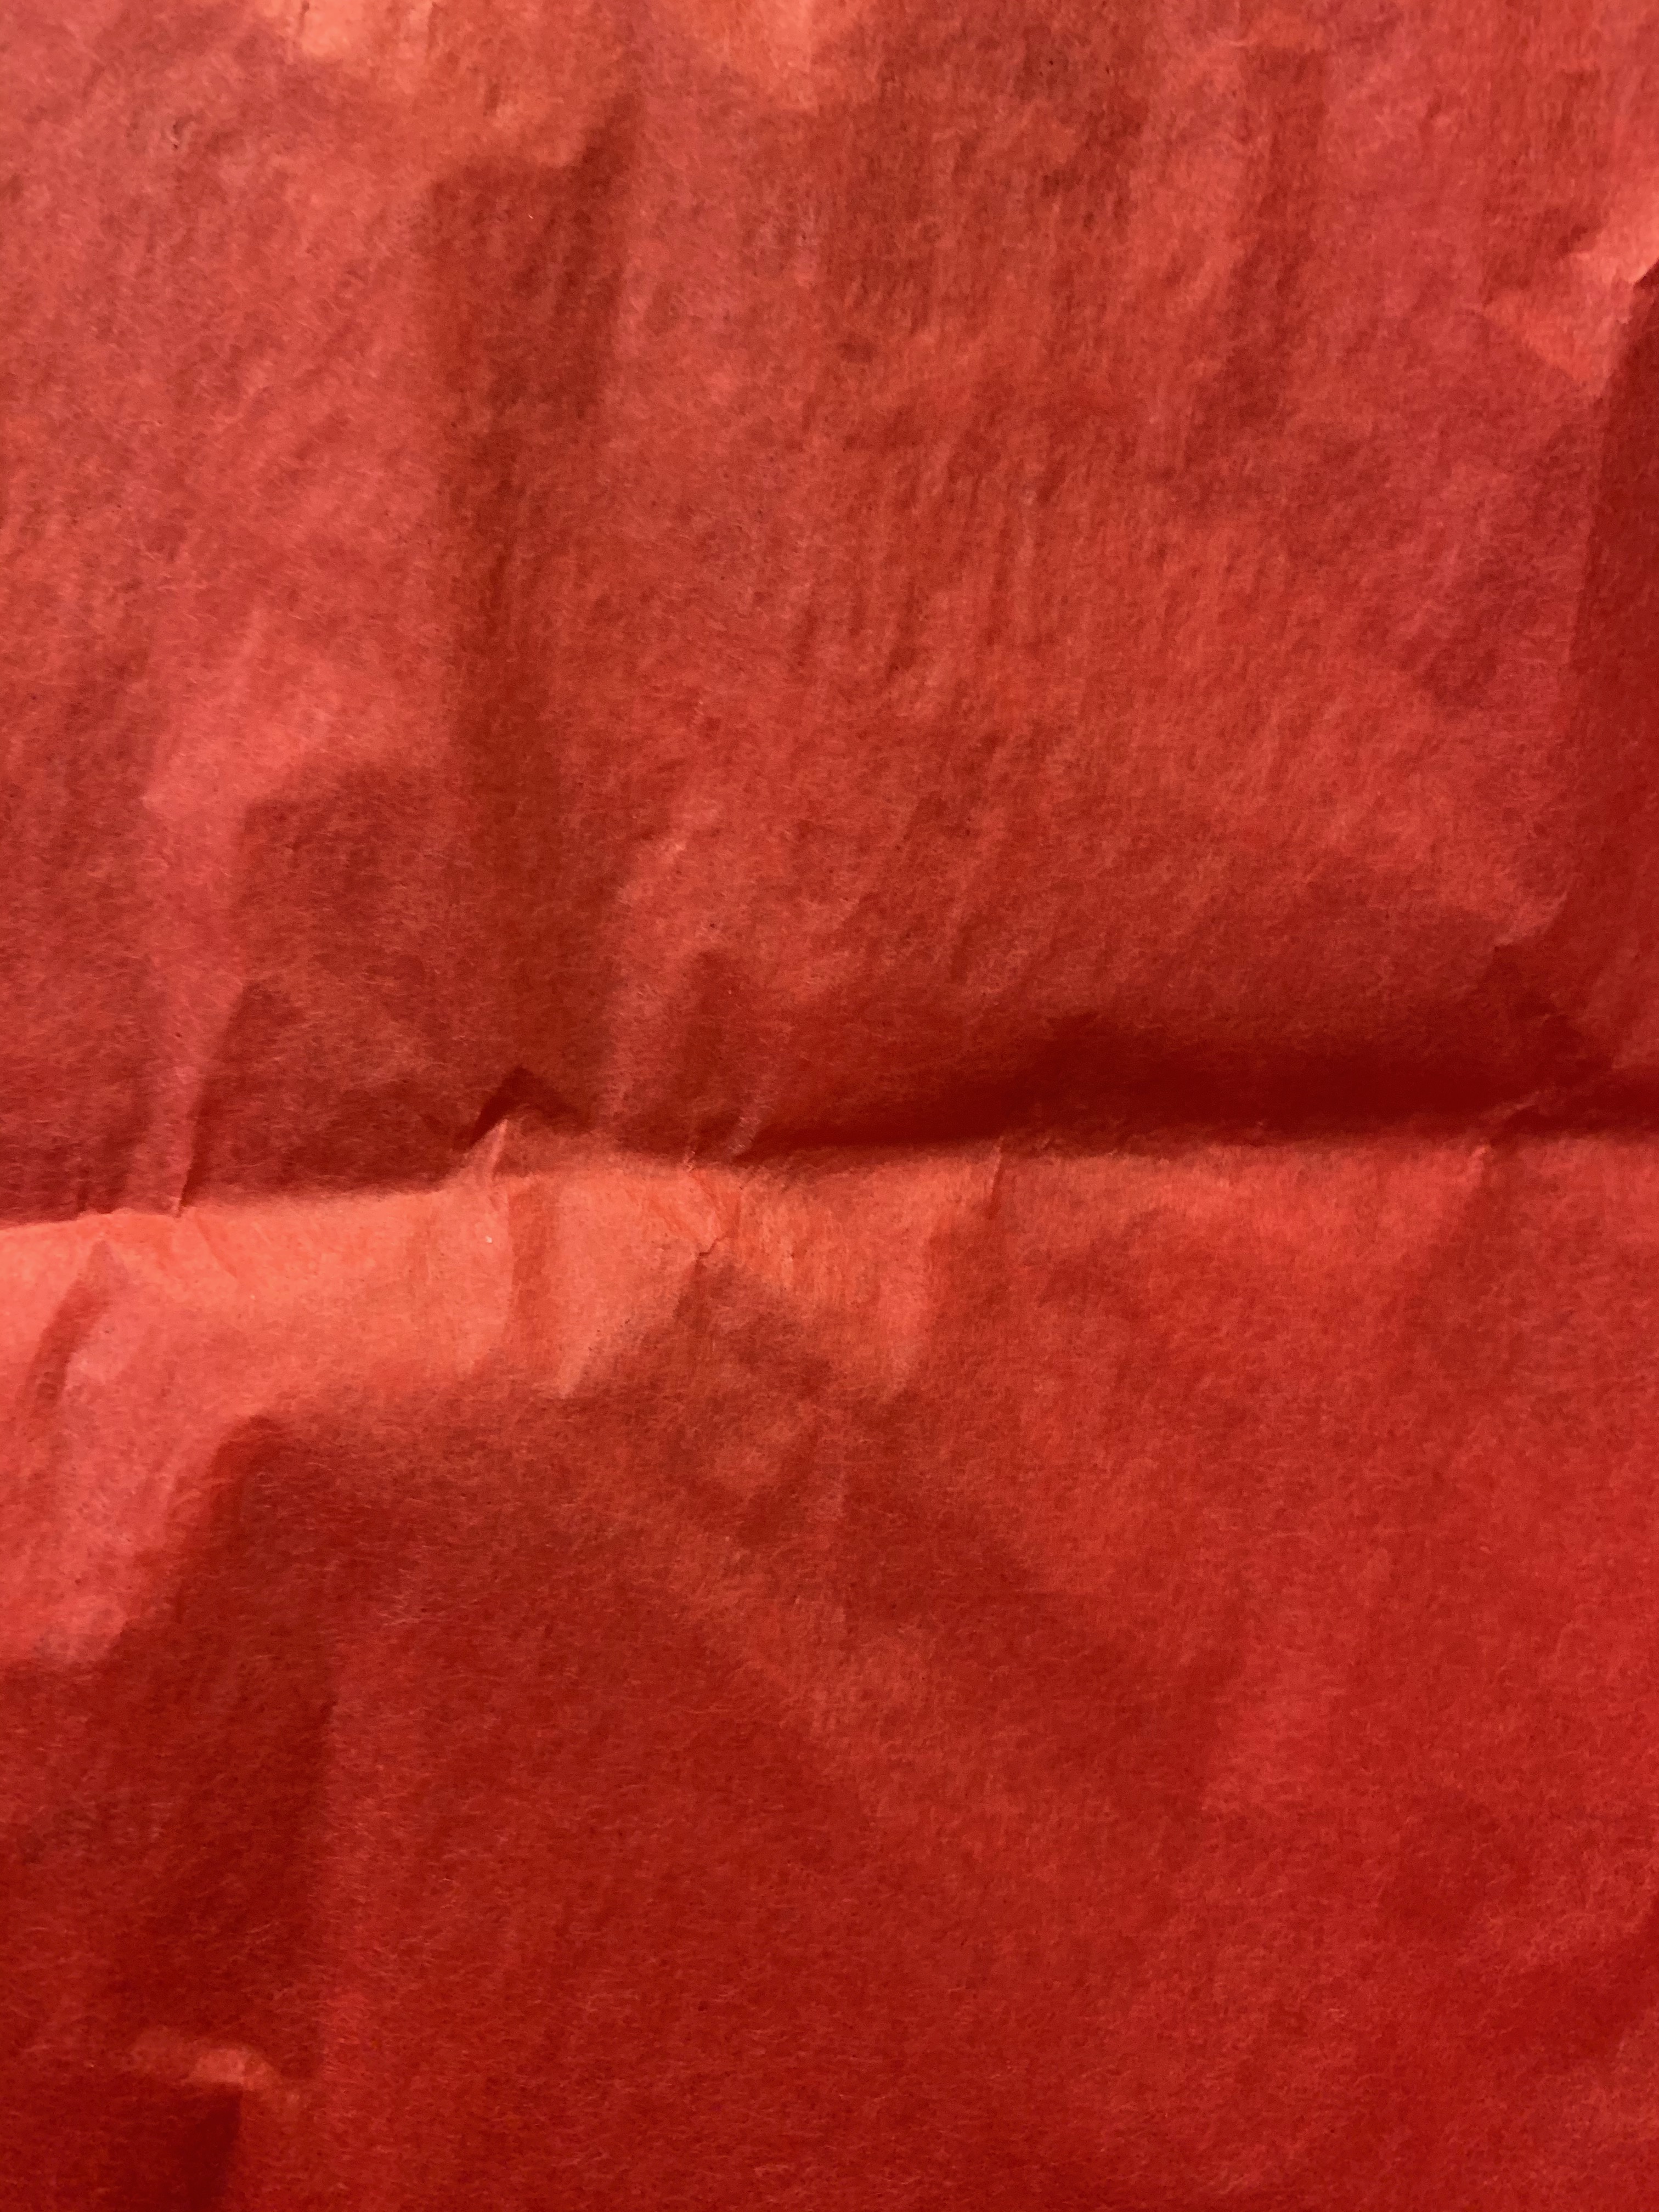 Vibrant red paper with fiber texture